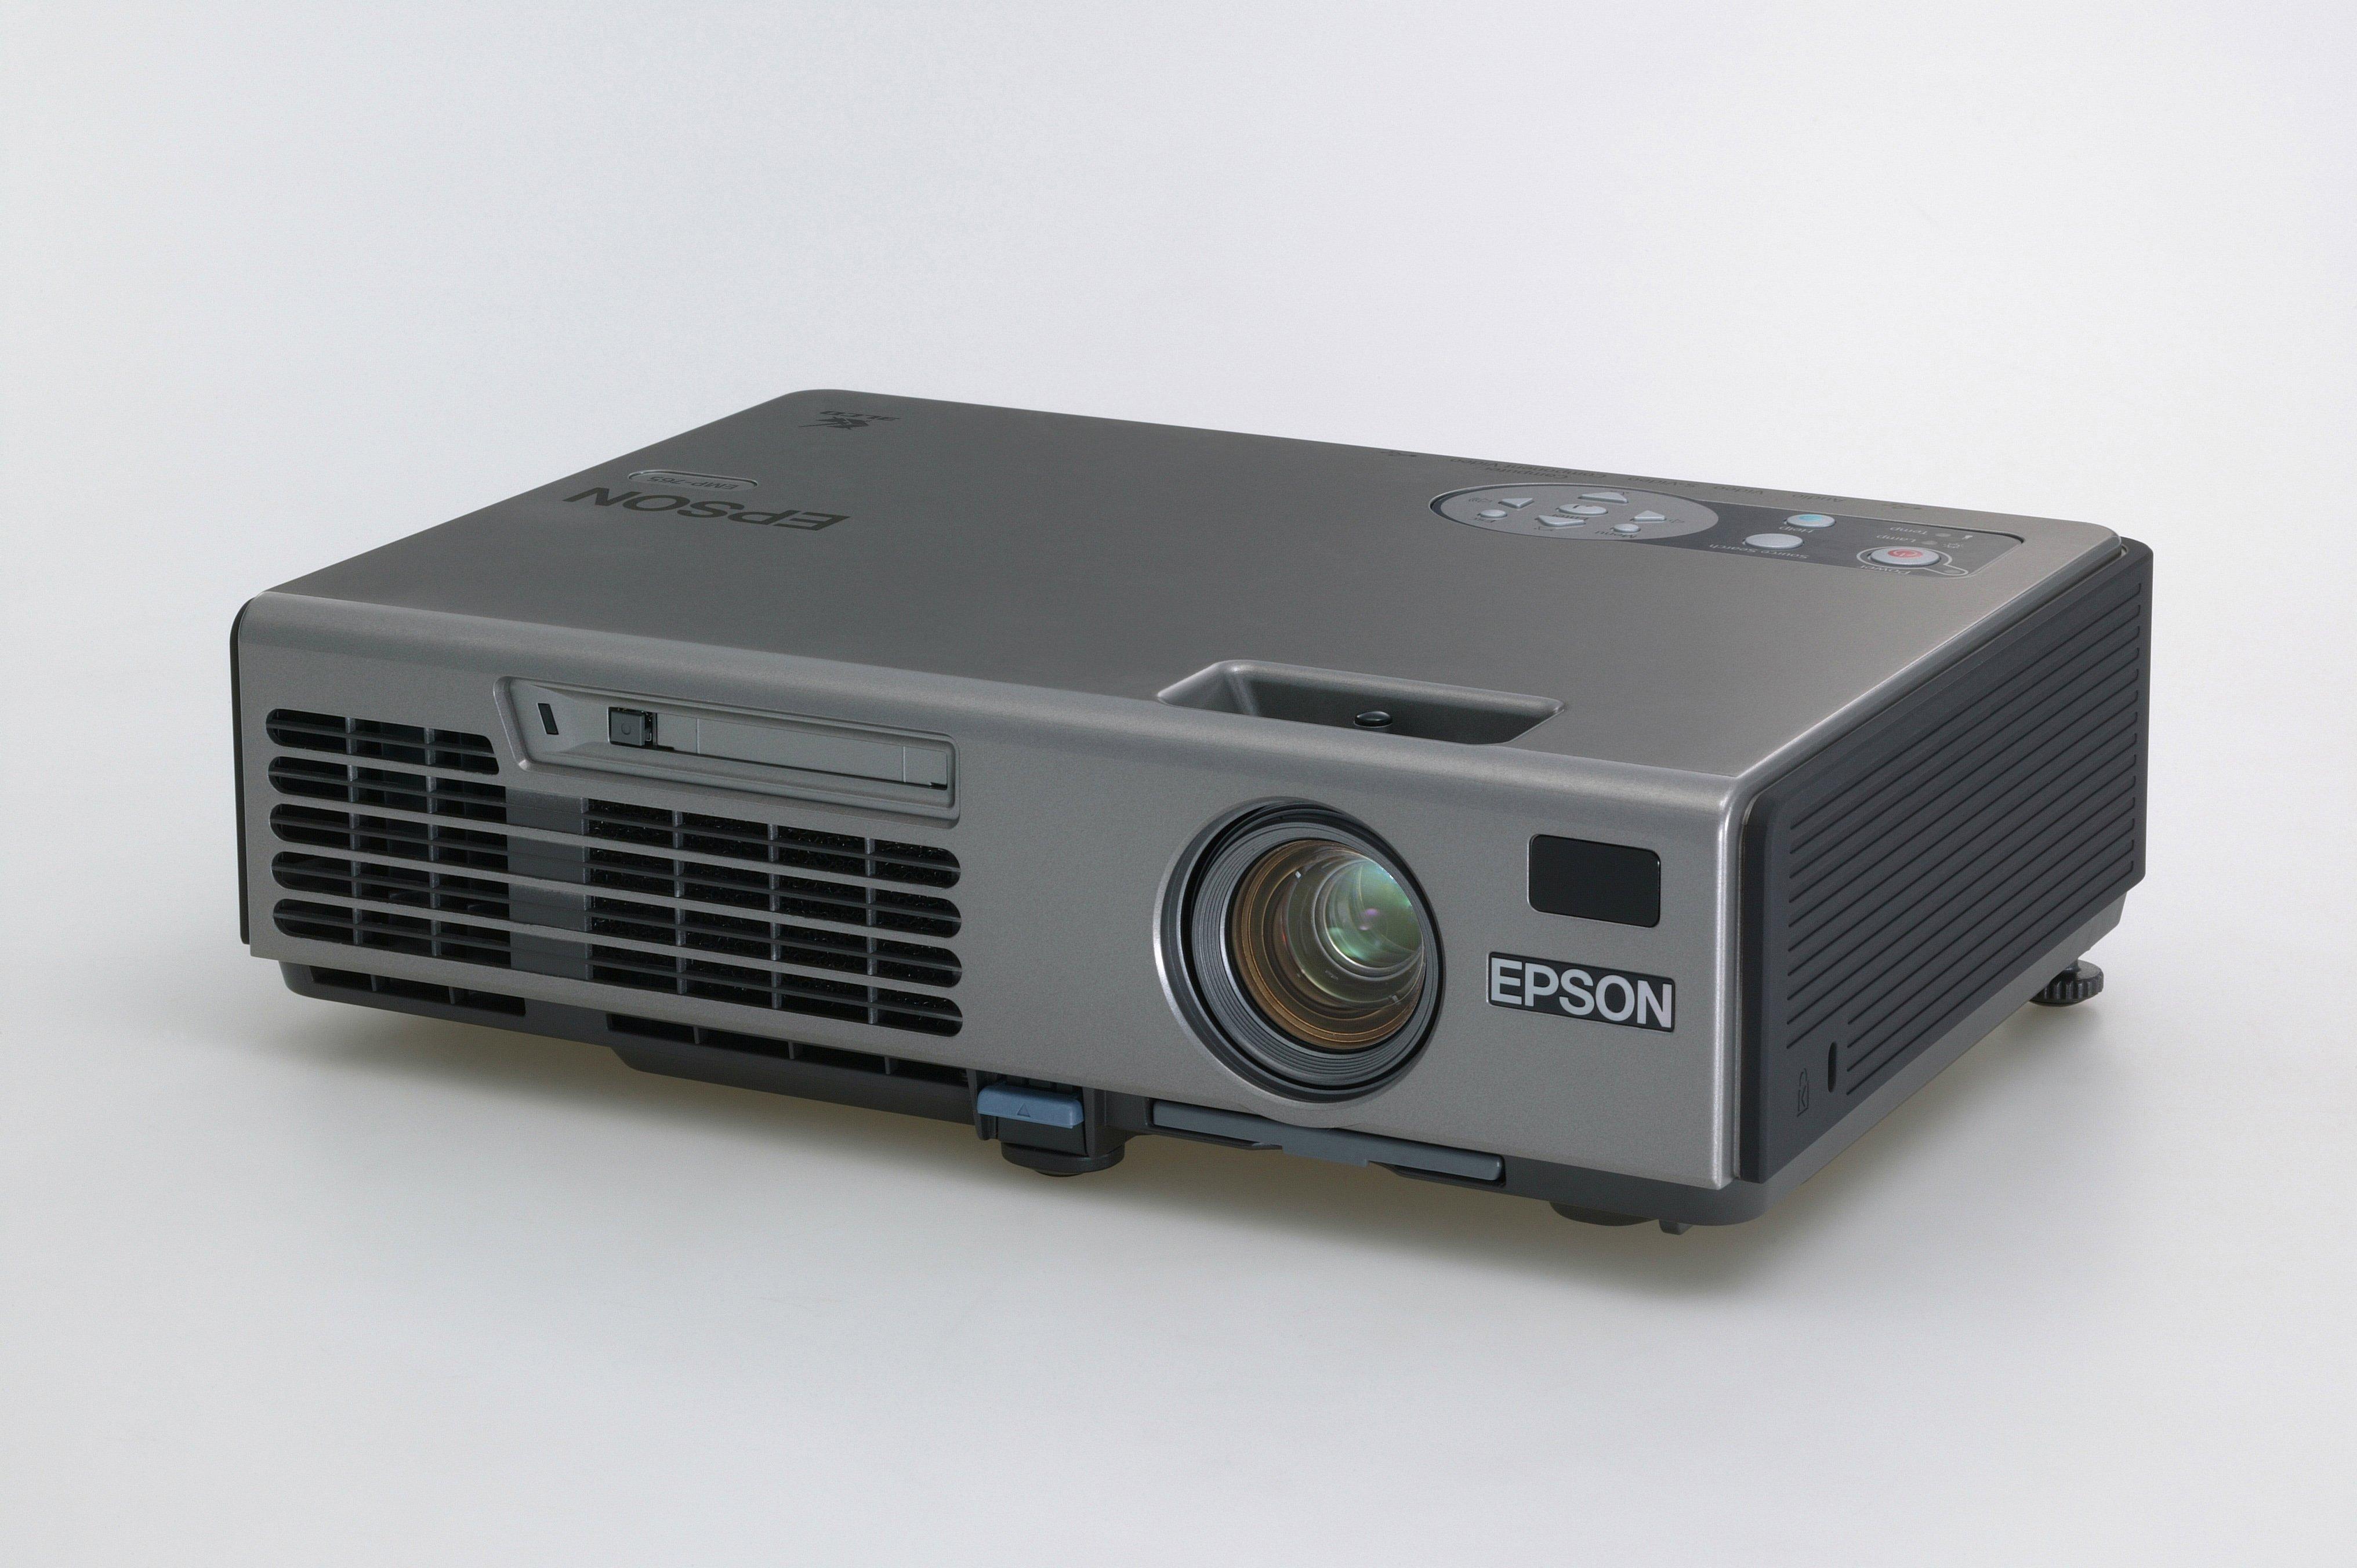 Epson EMP-765 | Projectors | Products | Epson Europe